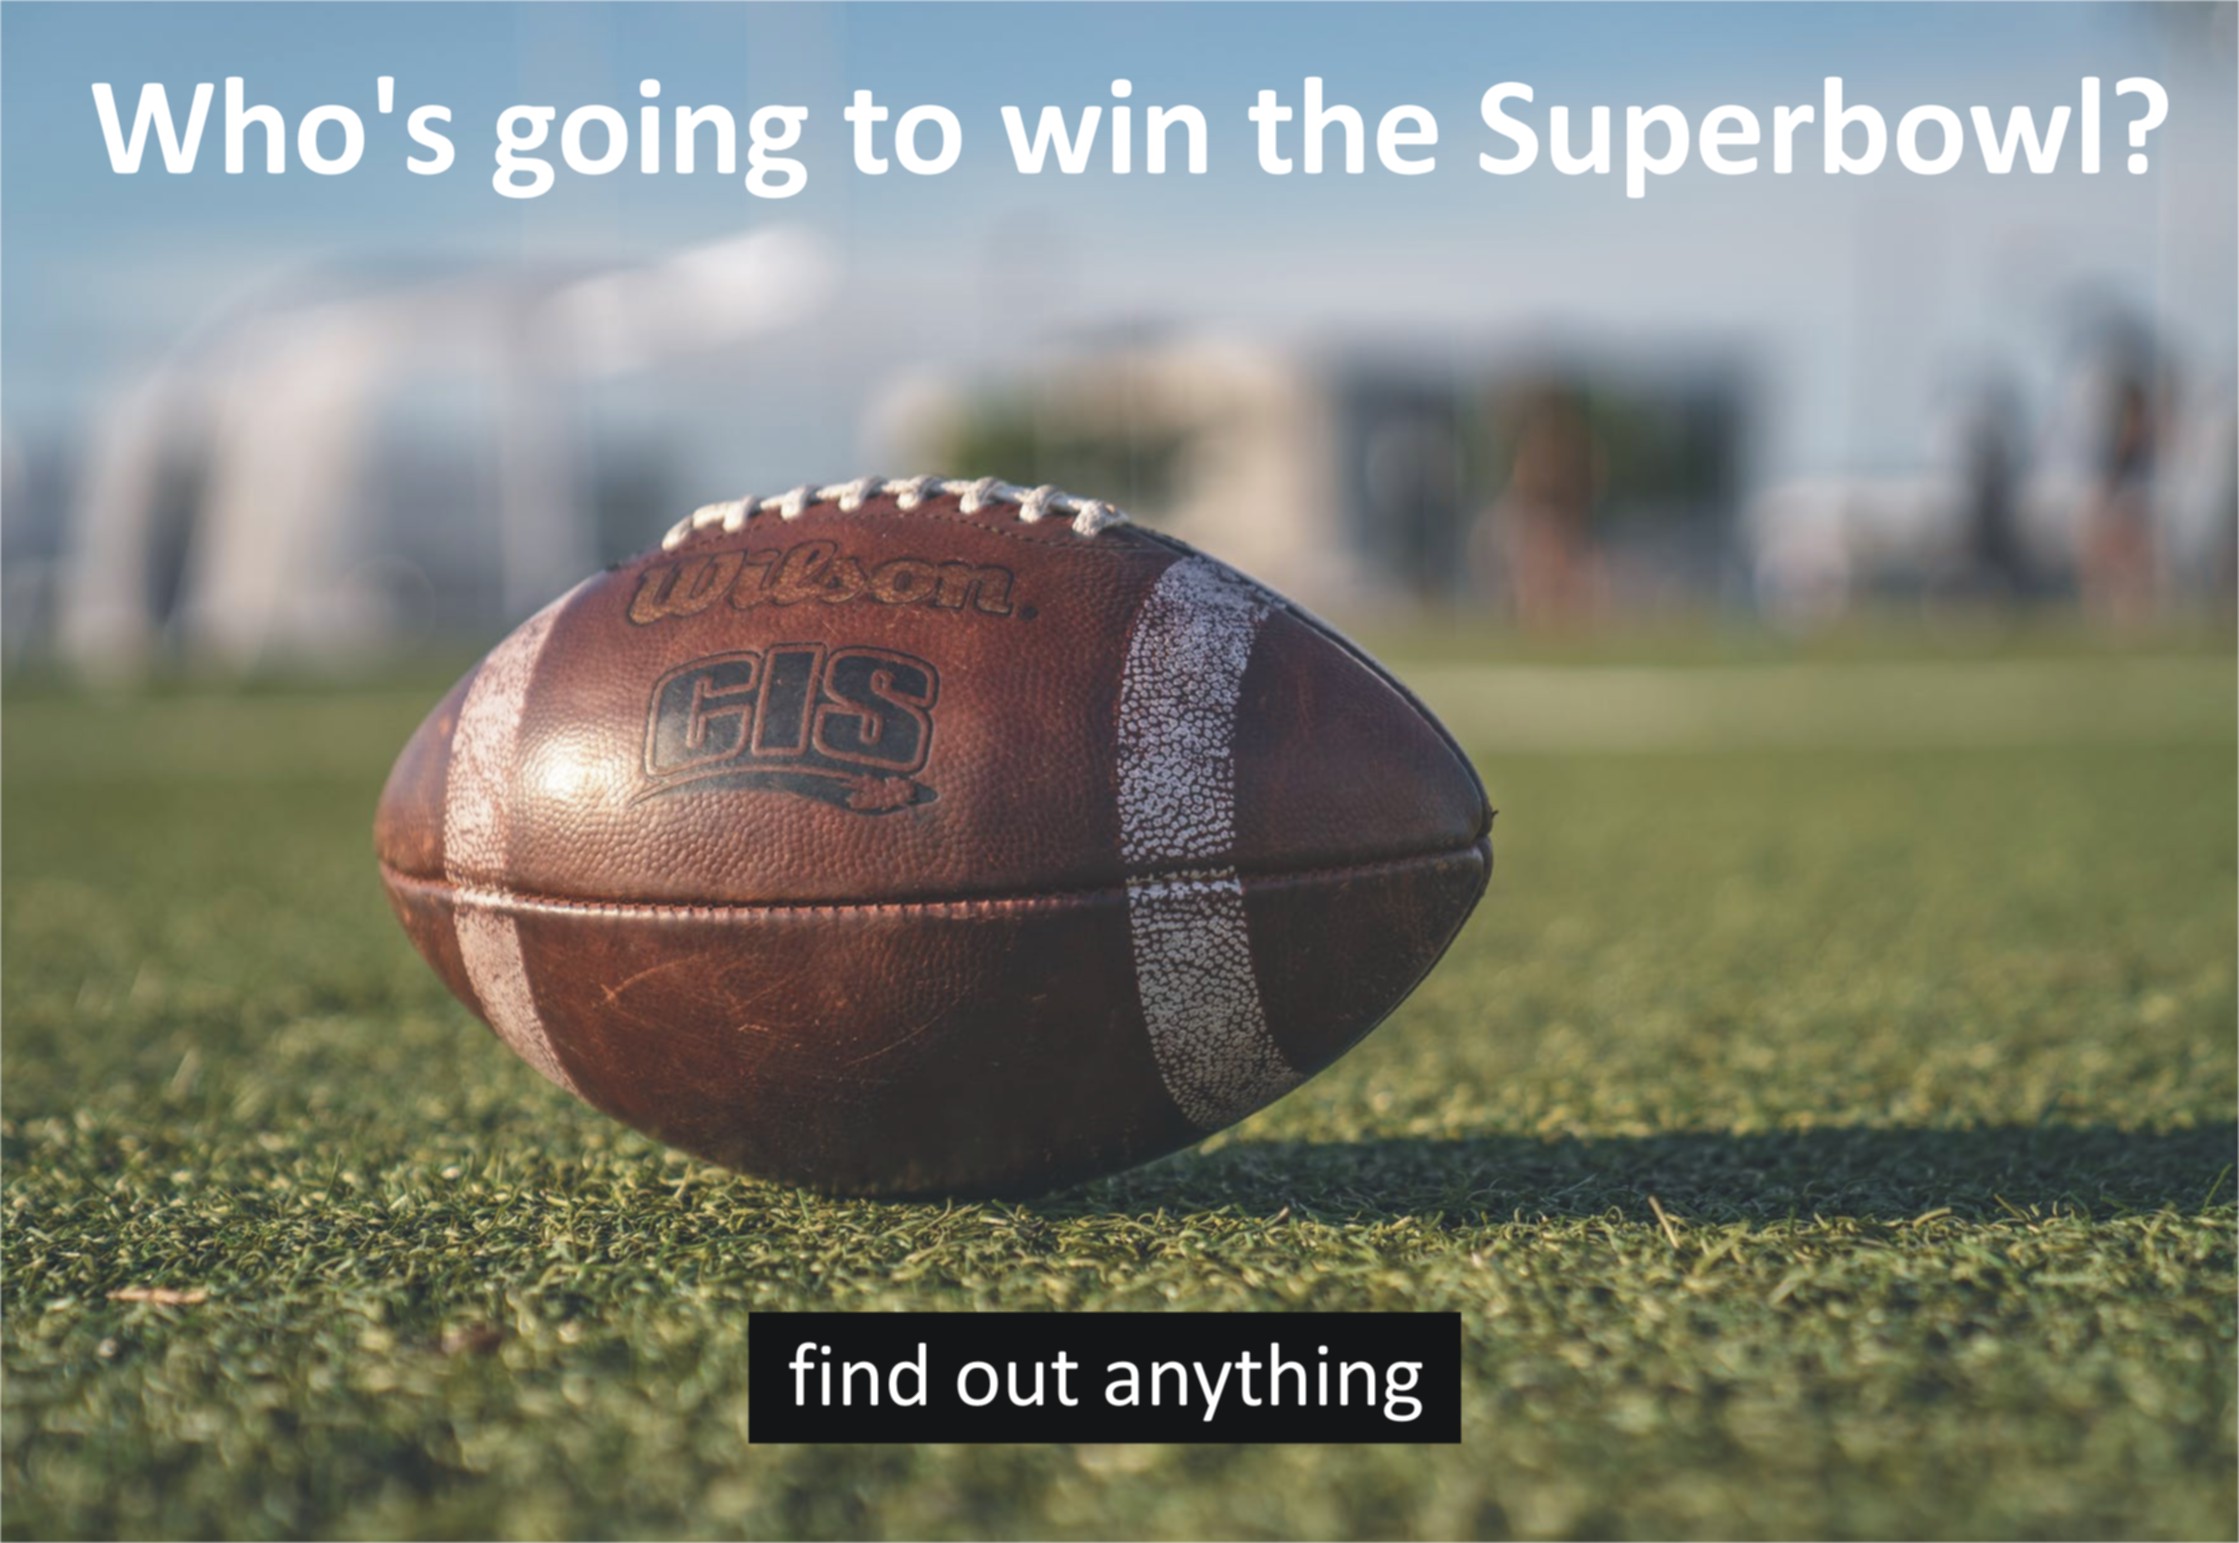 Who's going to win the Superbowl?